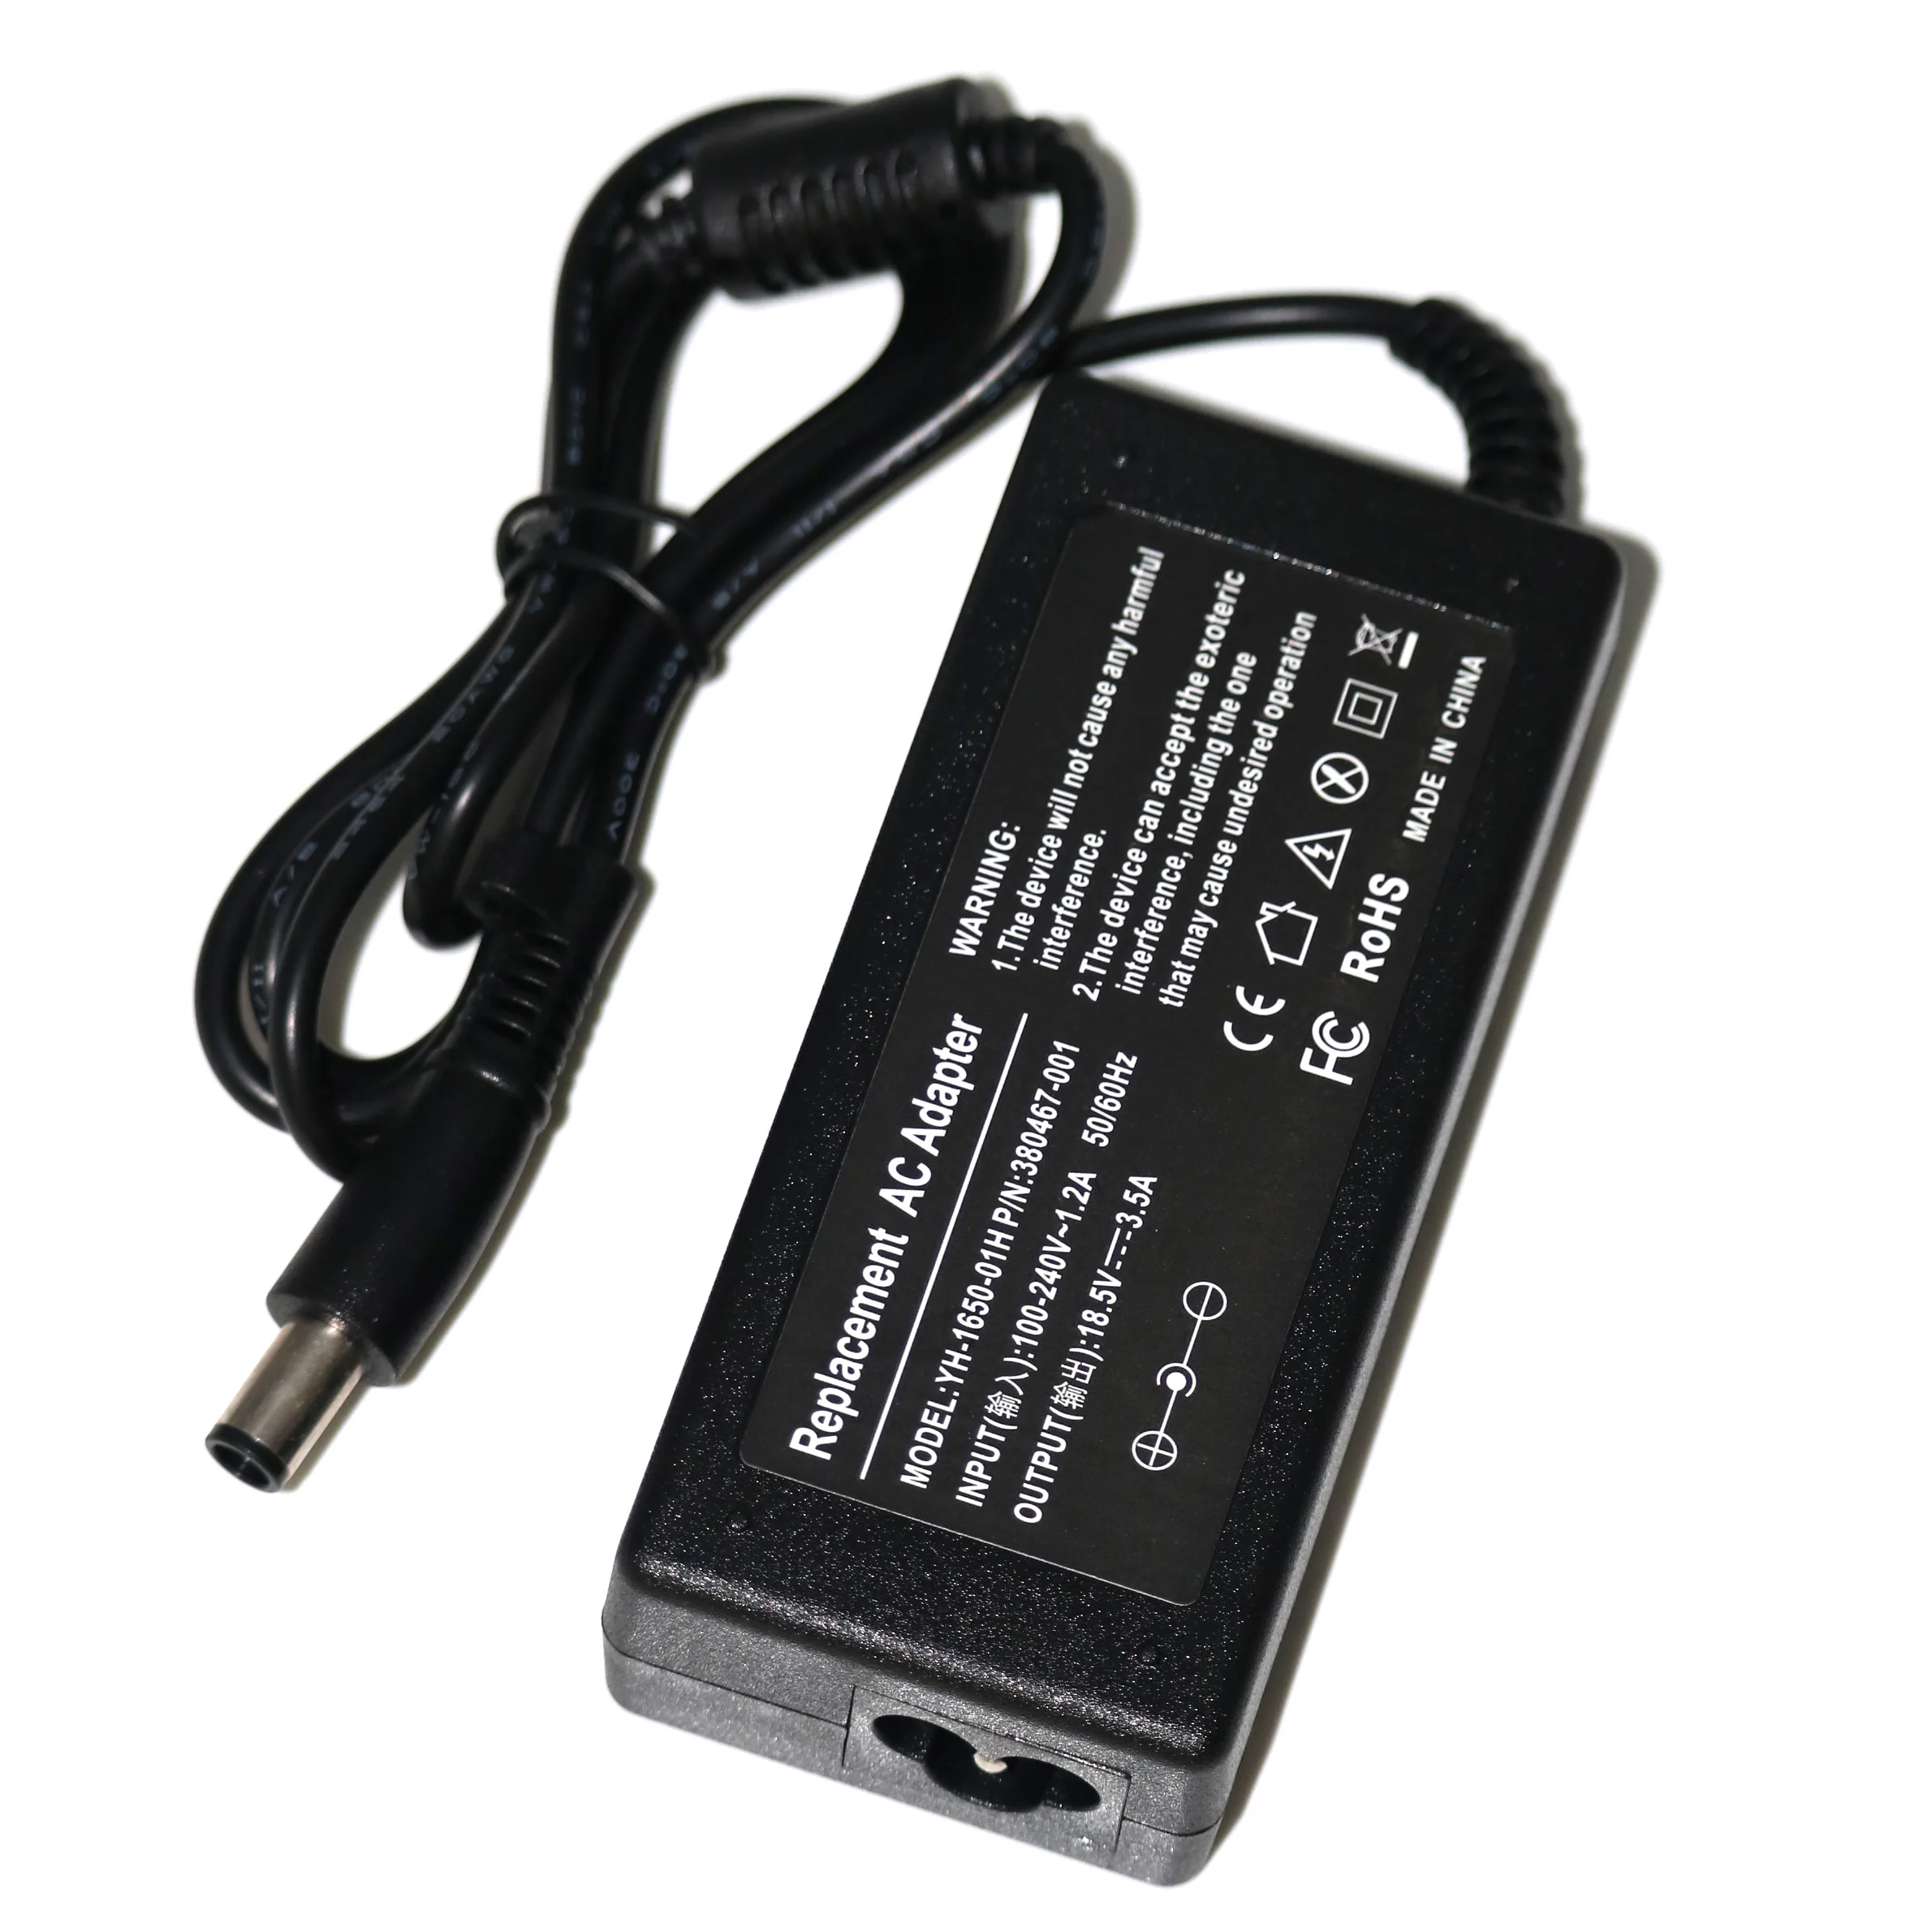 

18.5V 3.5A 65W Laptop/Notebook Power Charger Adapter for HP Pavilion G6 G56 CQ60 DV6 G50 G60 G61 G62 G70 G71 G72